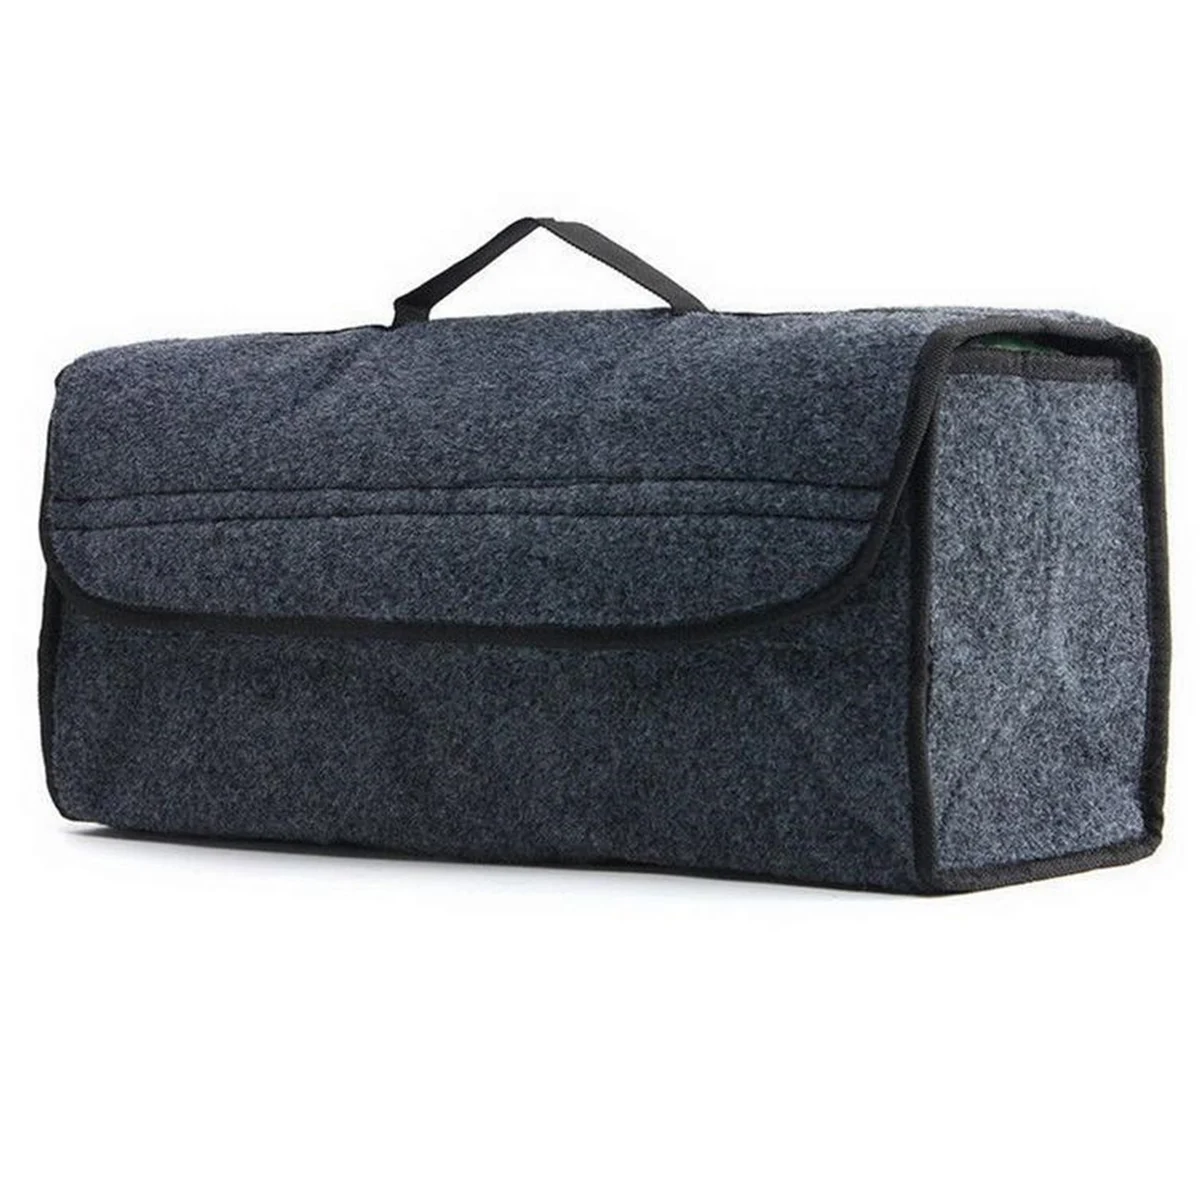 Portable Foldable Car Trunk Organizer Felt Cloth Storage Box Case Auto Interior Stowing Tidying Container Bags (1600450912046)